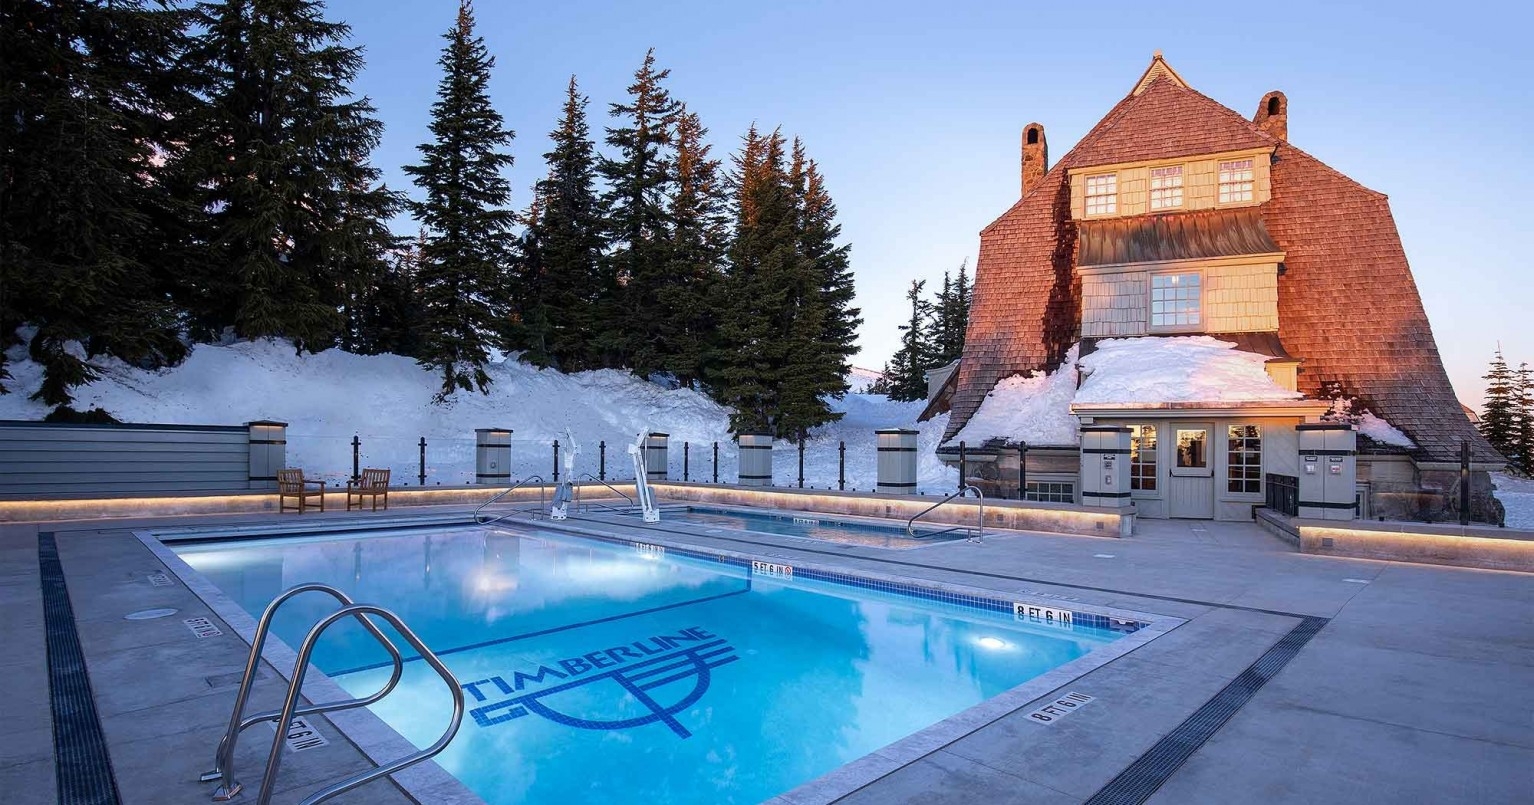 THE NEW OUTDOOR HEATED SWIMMING POOS AND HOT TUB AT TIMBERLINE